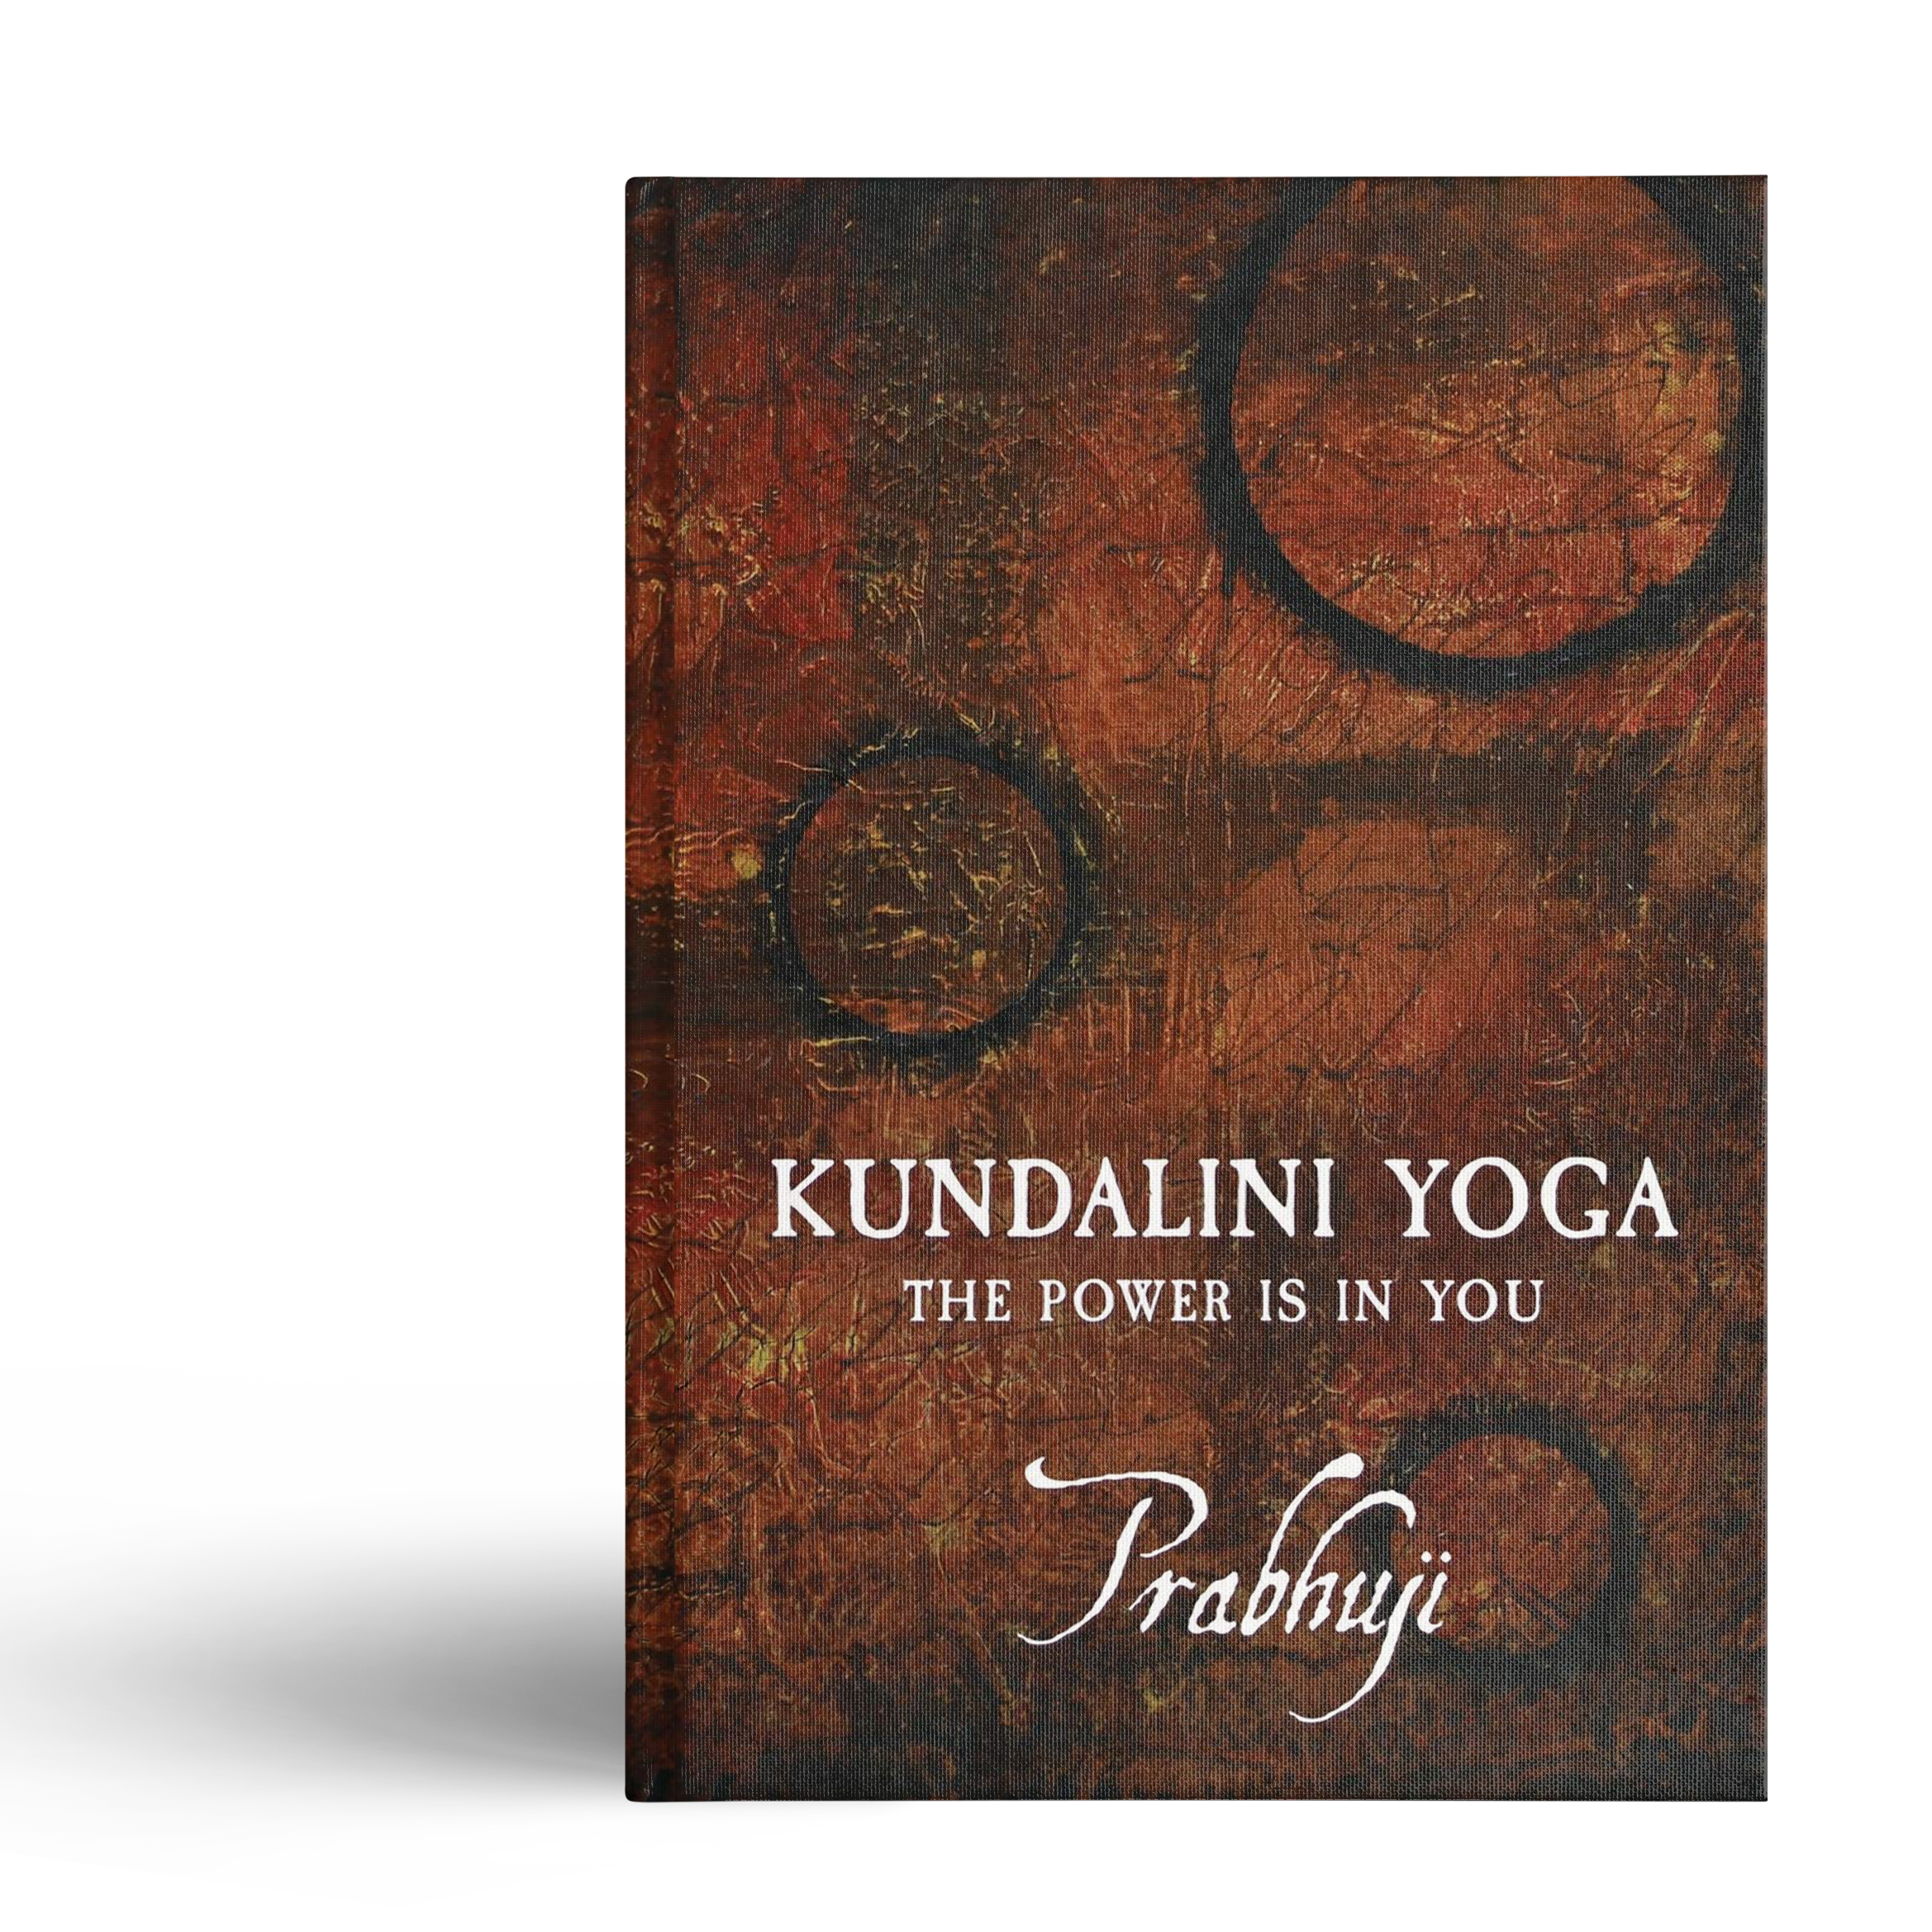 Kundalini yoga: The power is in you (Hard cover)